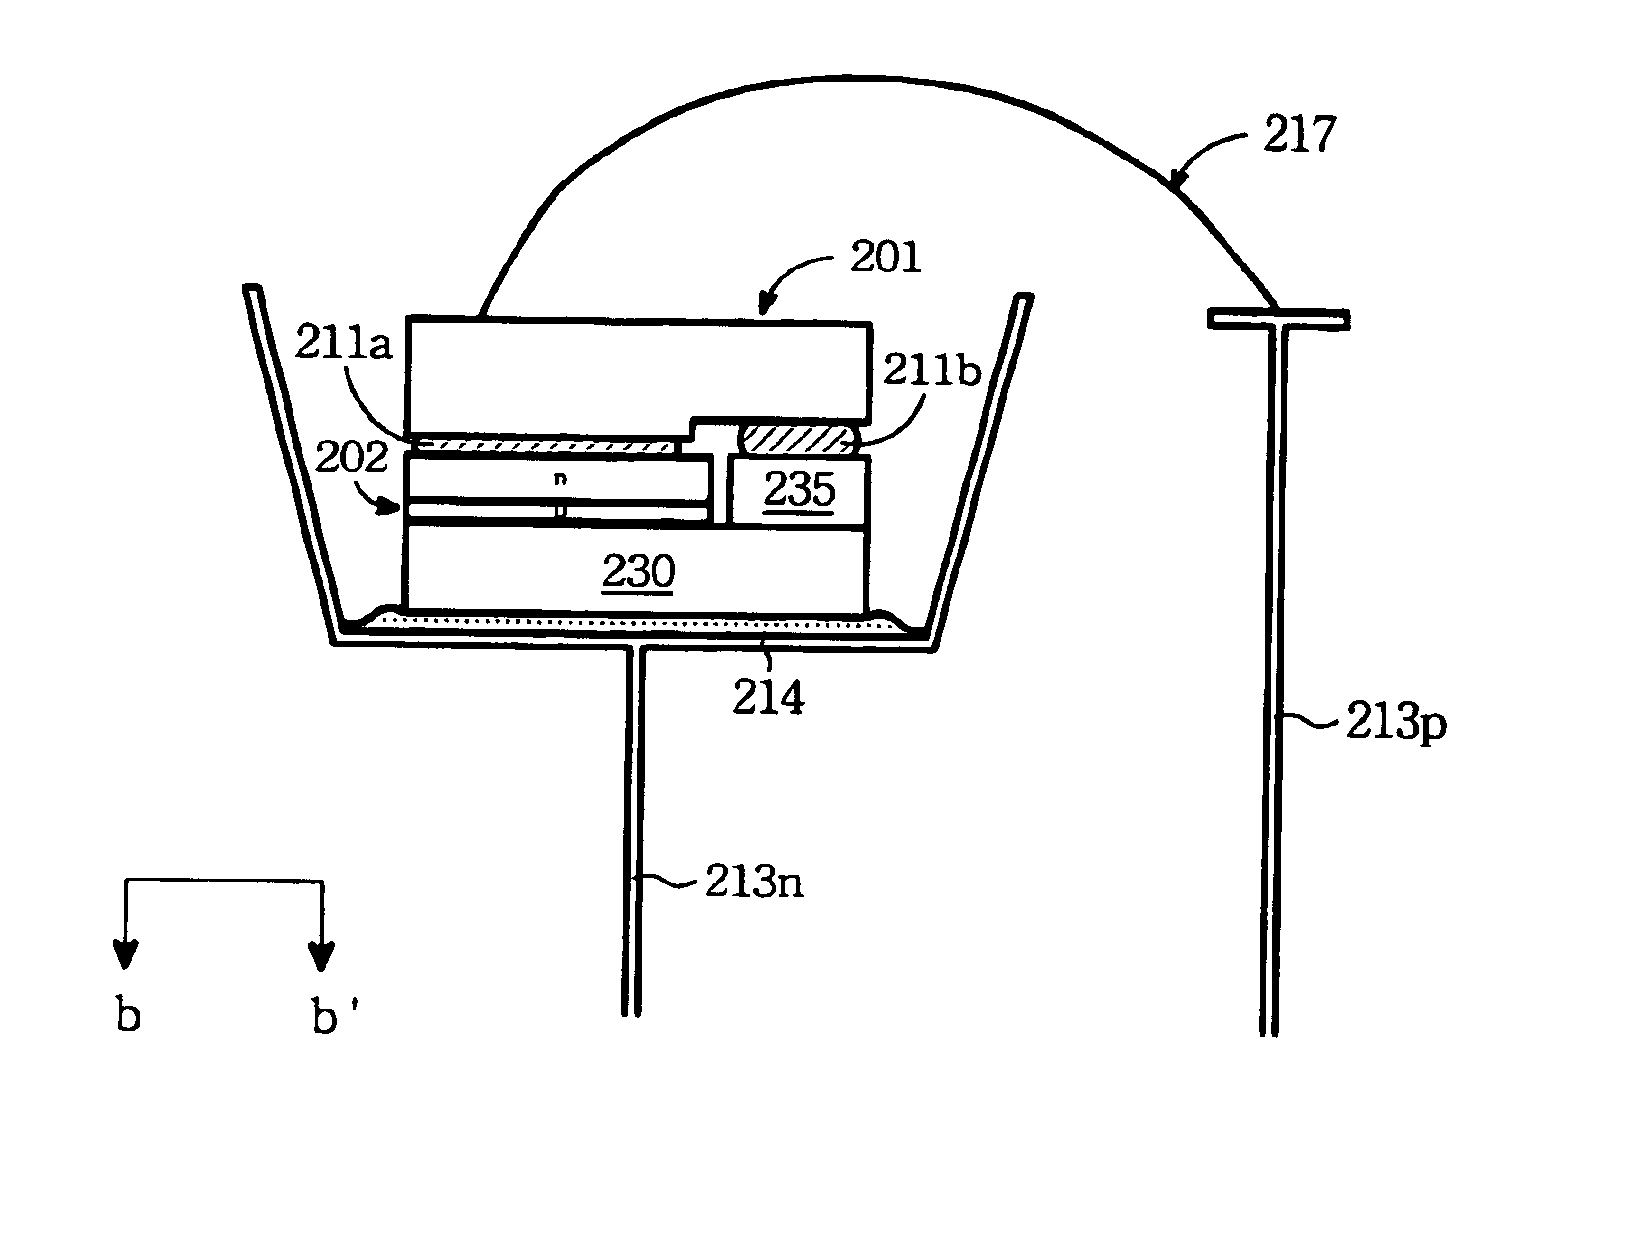 Package of lightemitting diode with protective element